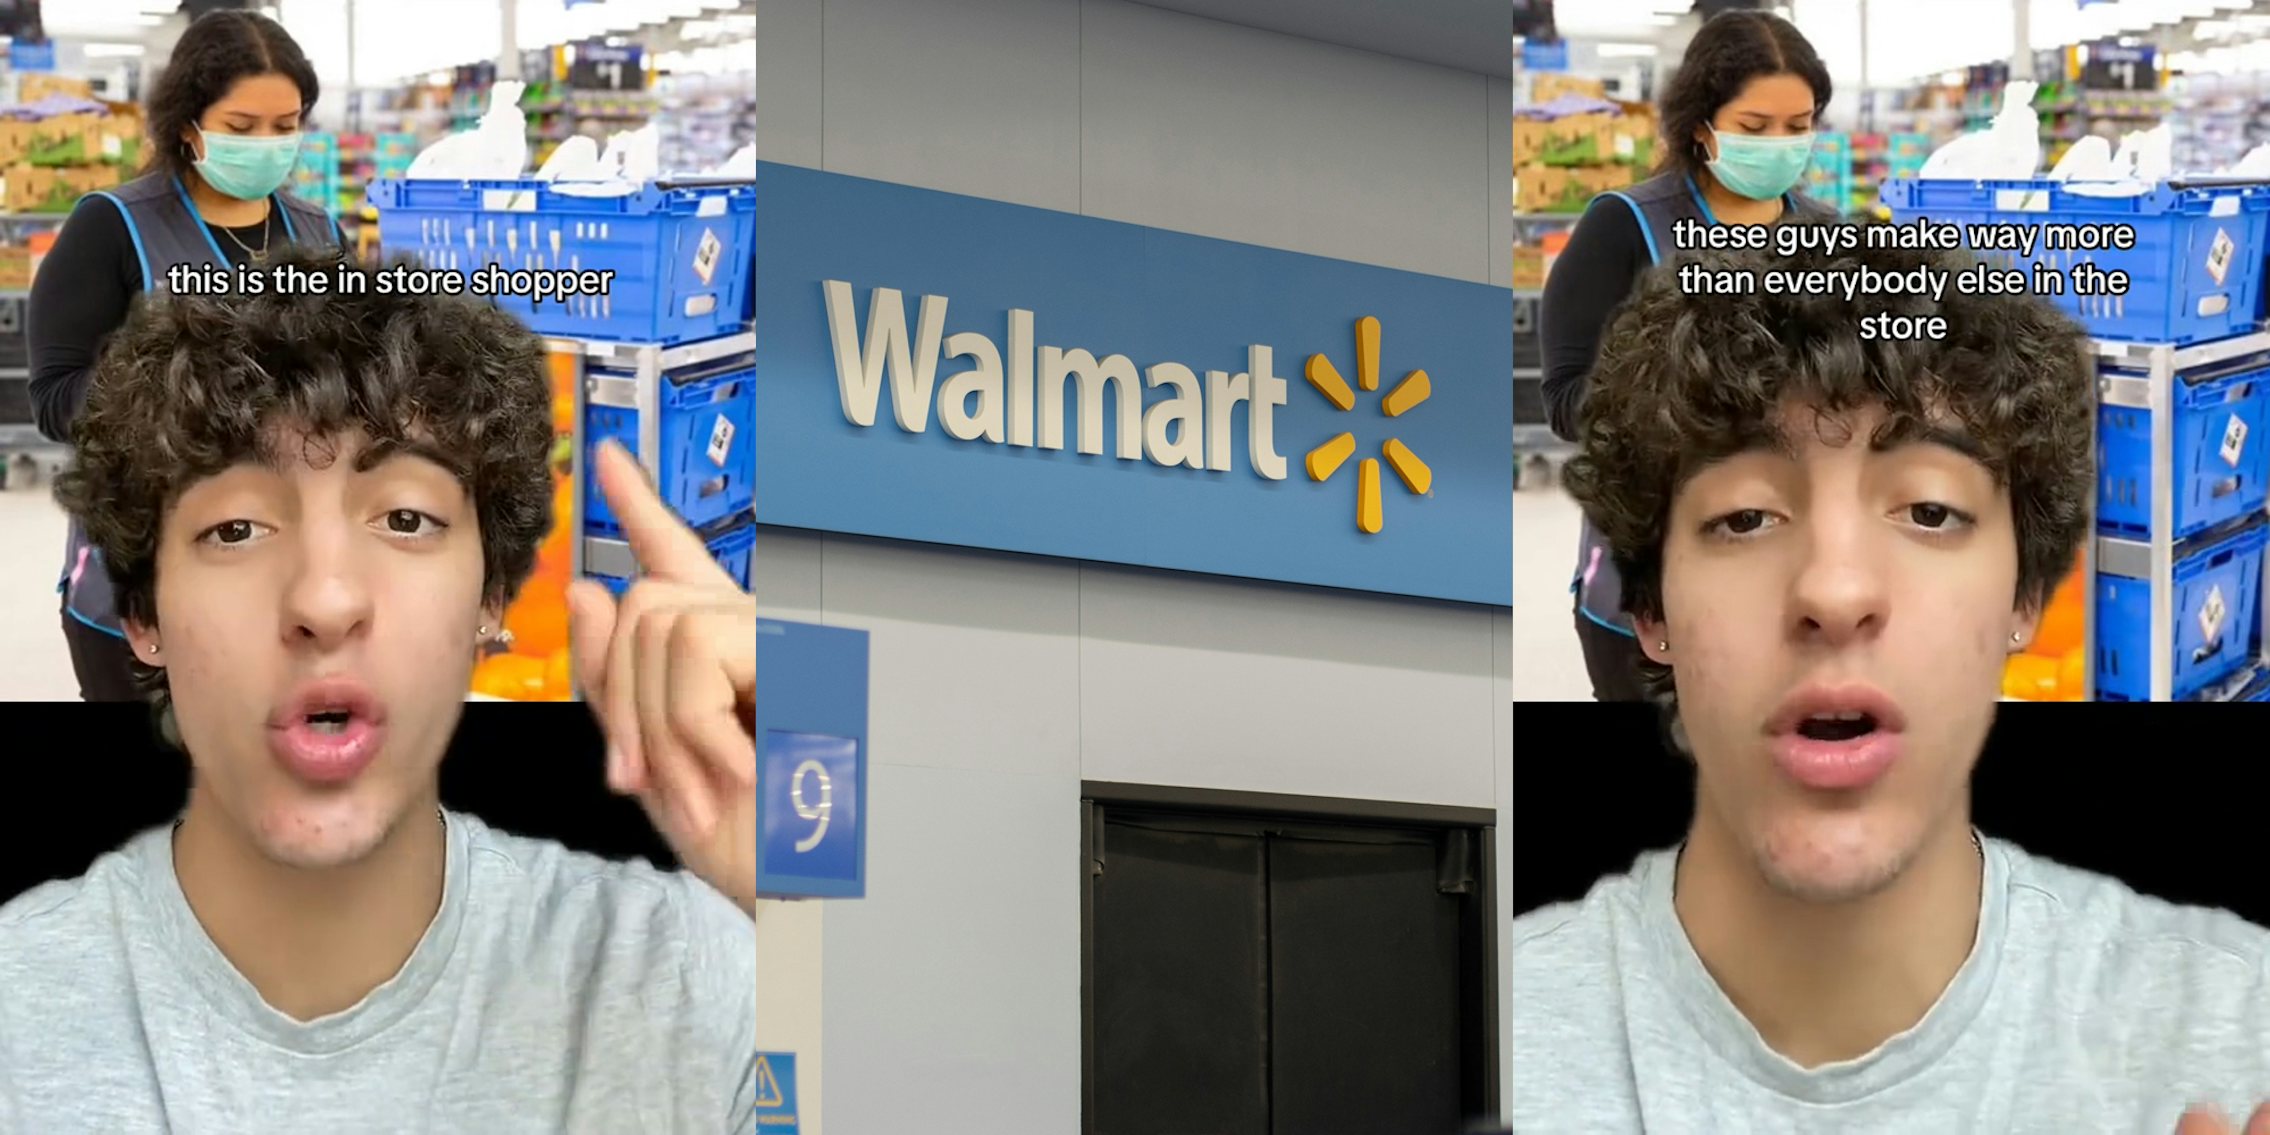 former Walmart employee speaking over image of in store shopper with caption 'this is the in store shopper' (l) Walmart interior sign (c) former Walmart employee speaking over image of in store shopper with caption 'these guys make way more than everybody else in the store' (r)